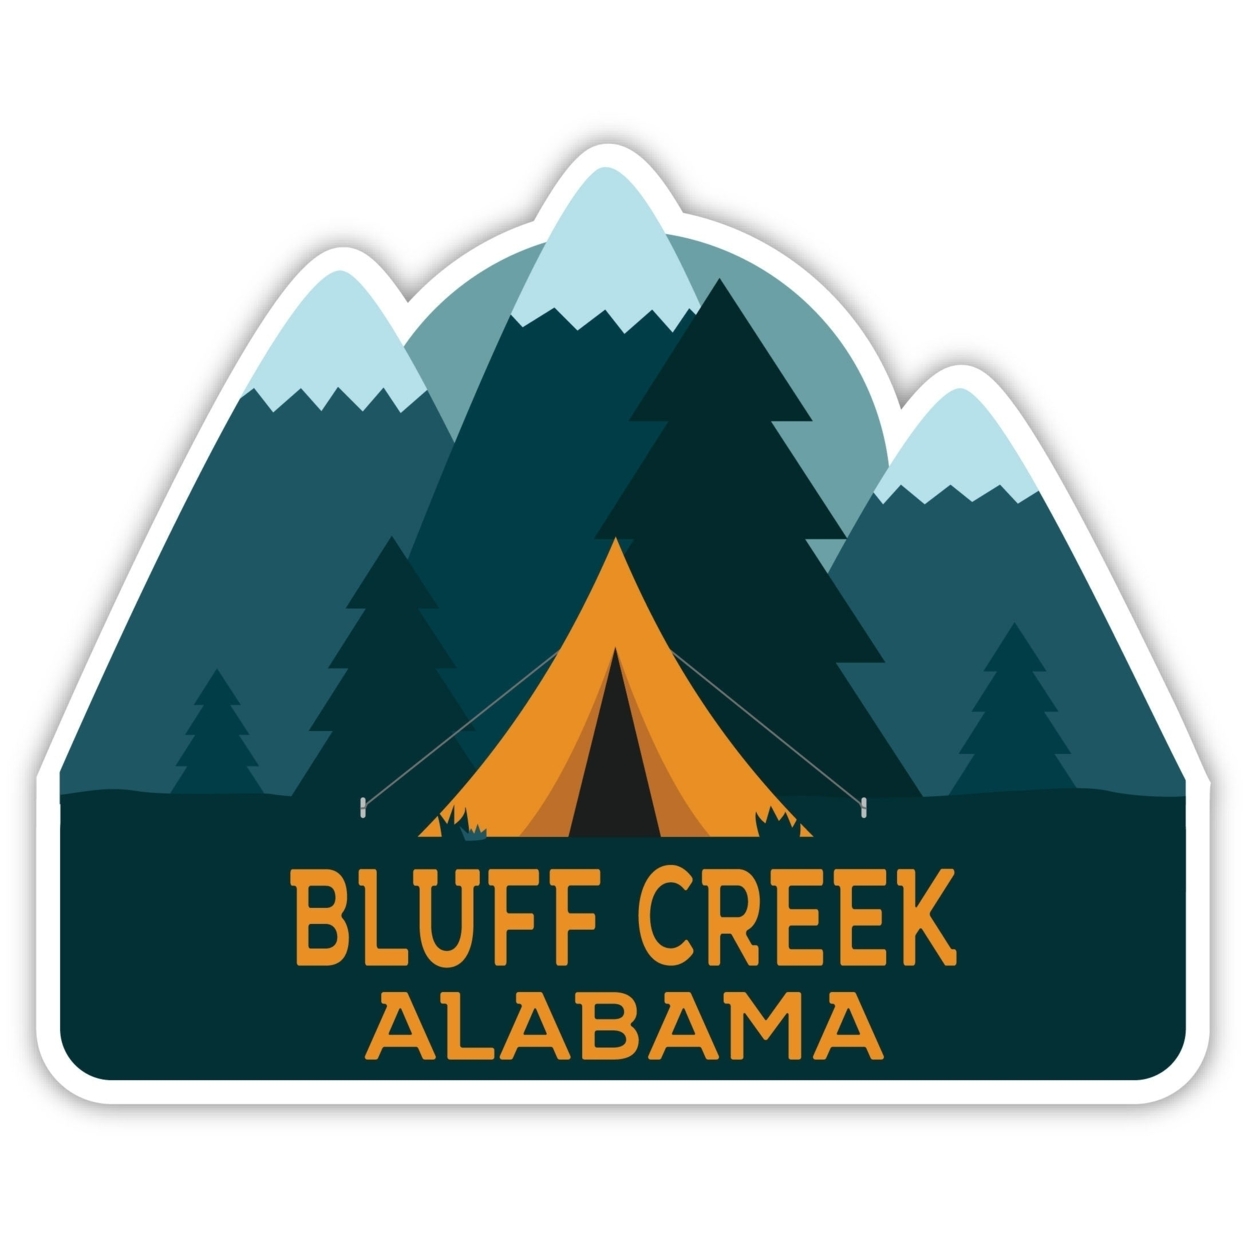 Bluff Creek Alabama Souvenir Decorative Stickers (Choose Theme And Size) - 4-Pack, 2-Inch, Tent